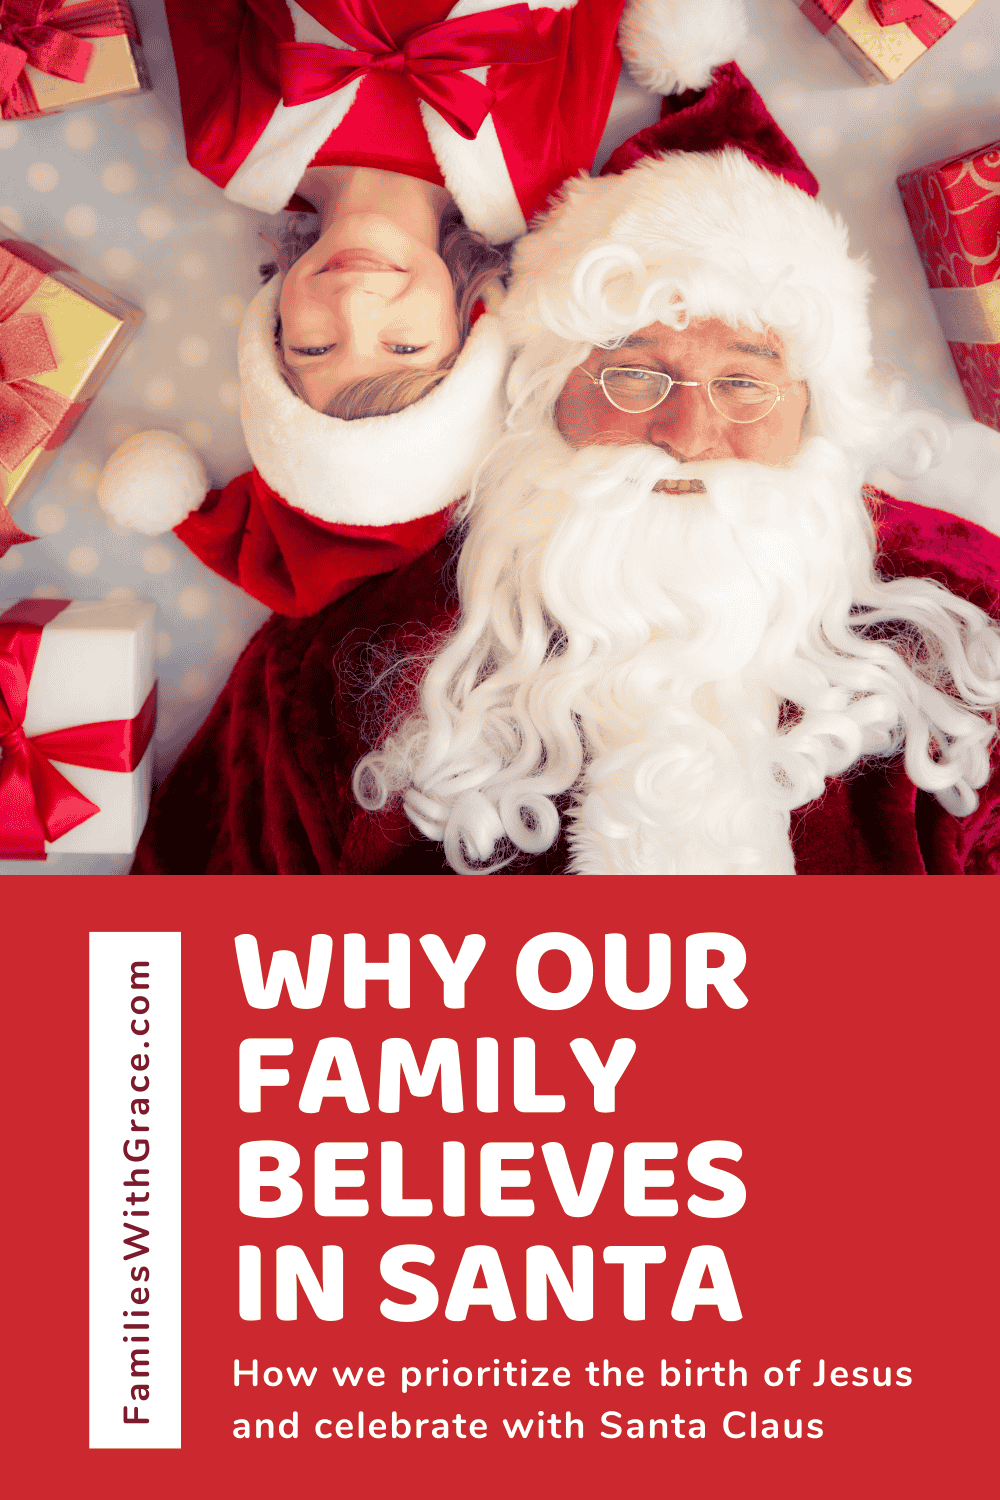 Why our family believes in Santa Claus